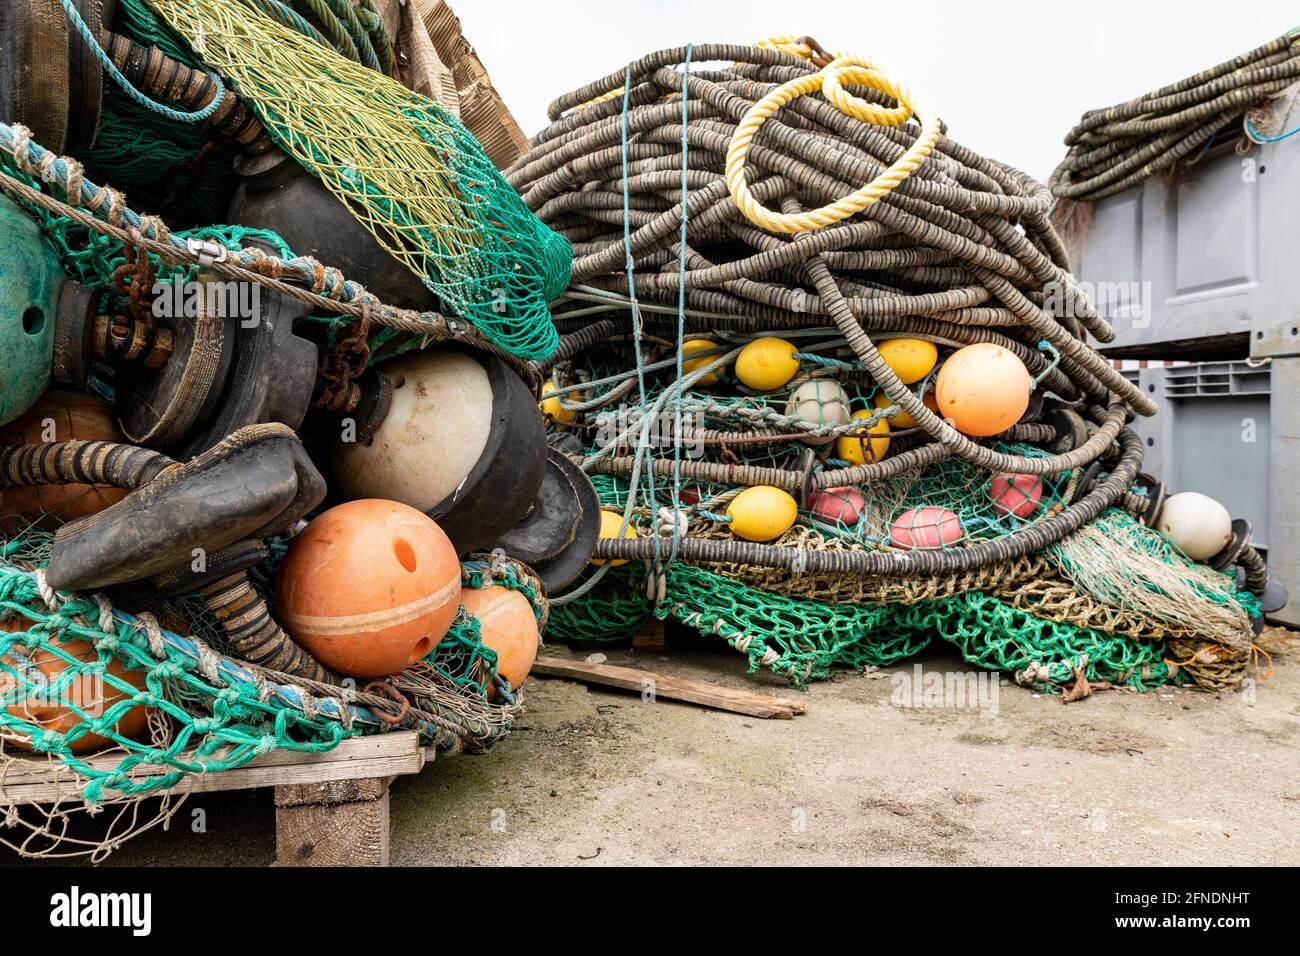 https://c8.alamy.com/comp/2FNDNHT/mooring-ropes-and-nets-on-a-fishing-boat-accessories-needed-for-fishing-spring-season-2FNDNHT.jpg